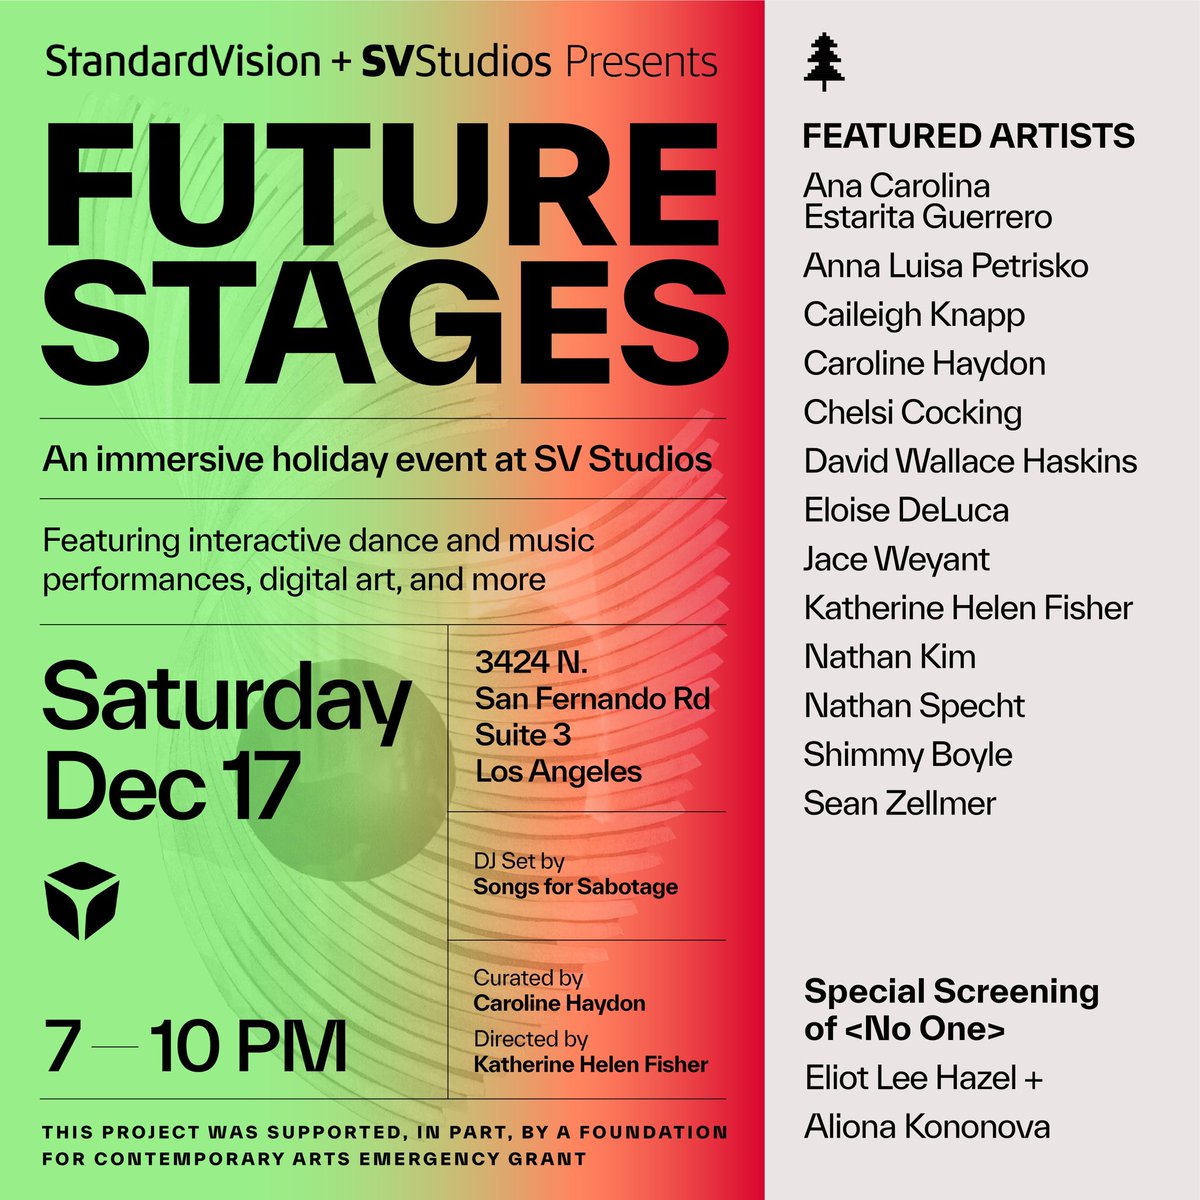 Our partners @standard_vision and @sv__studios present FUTURE STAGES, an immersive evening at SVStudios filled with interactive dance and music performances, digital art, film screenings and more. 

DJ set by @Songs4Sabotage 

See you there this Saturday: bit.ly/FUTURESTAGES